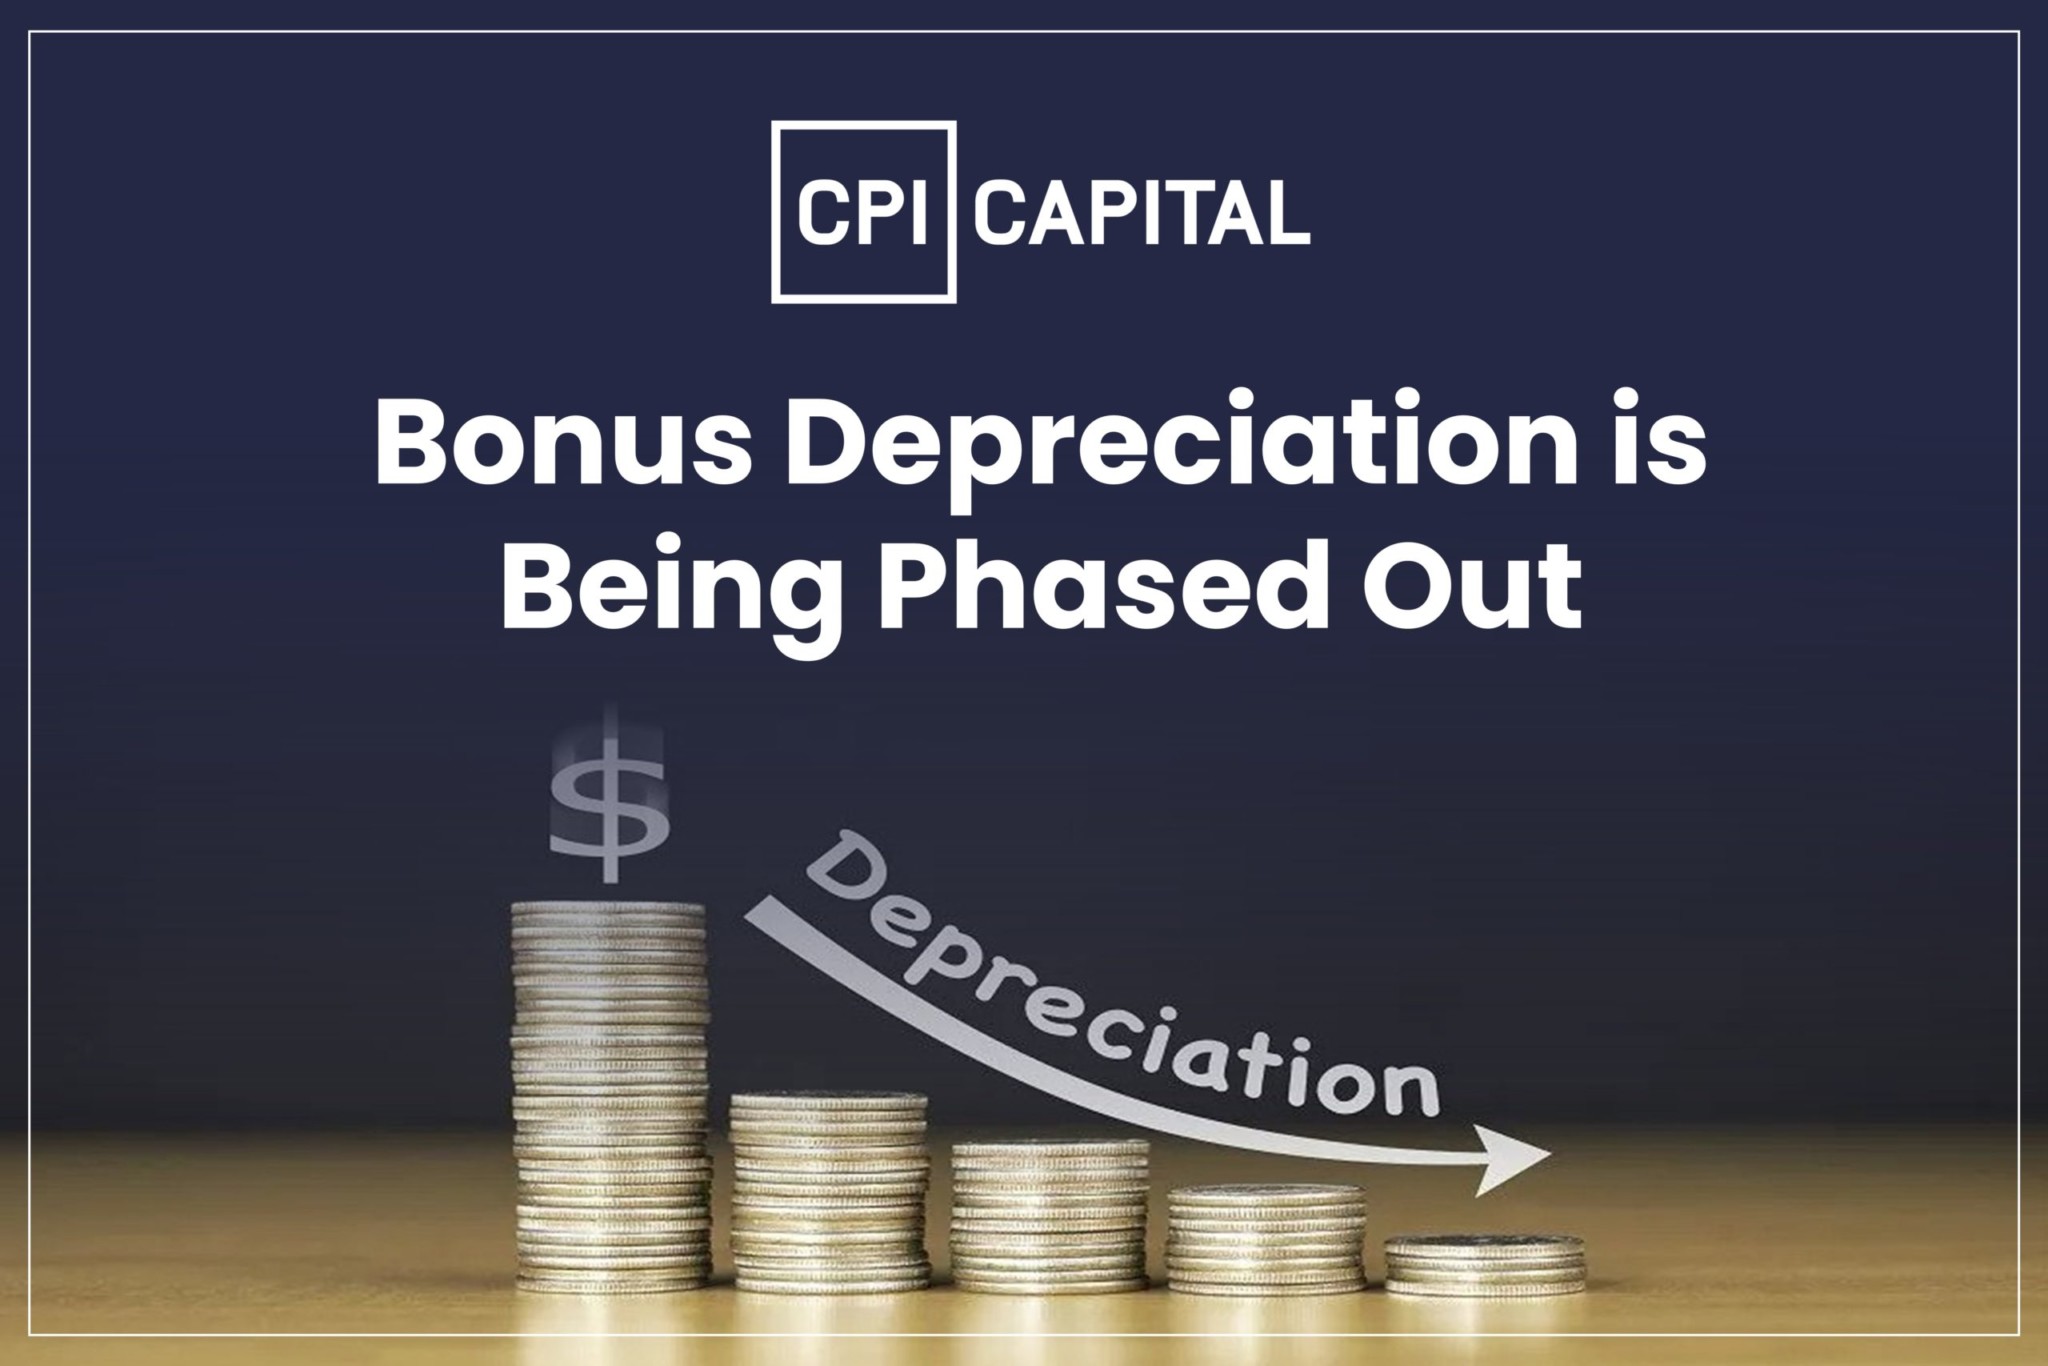 Bonus Depreciation in Real Estate Investment is being Phased Out